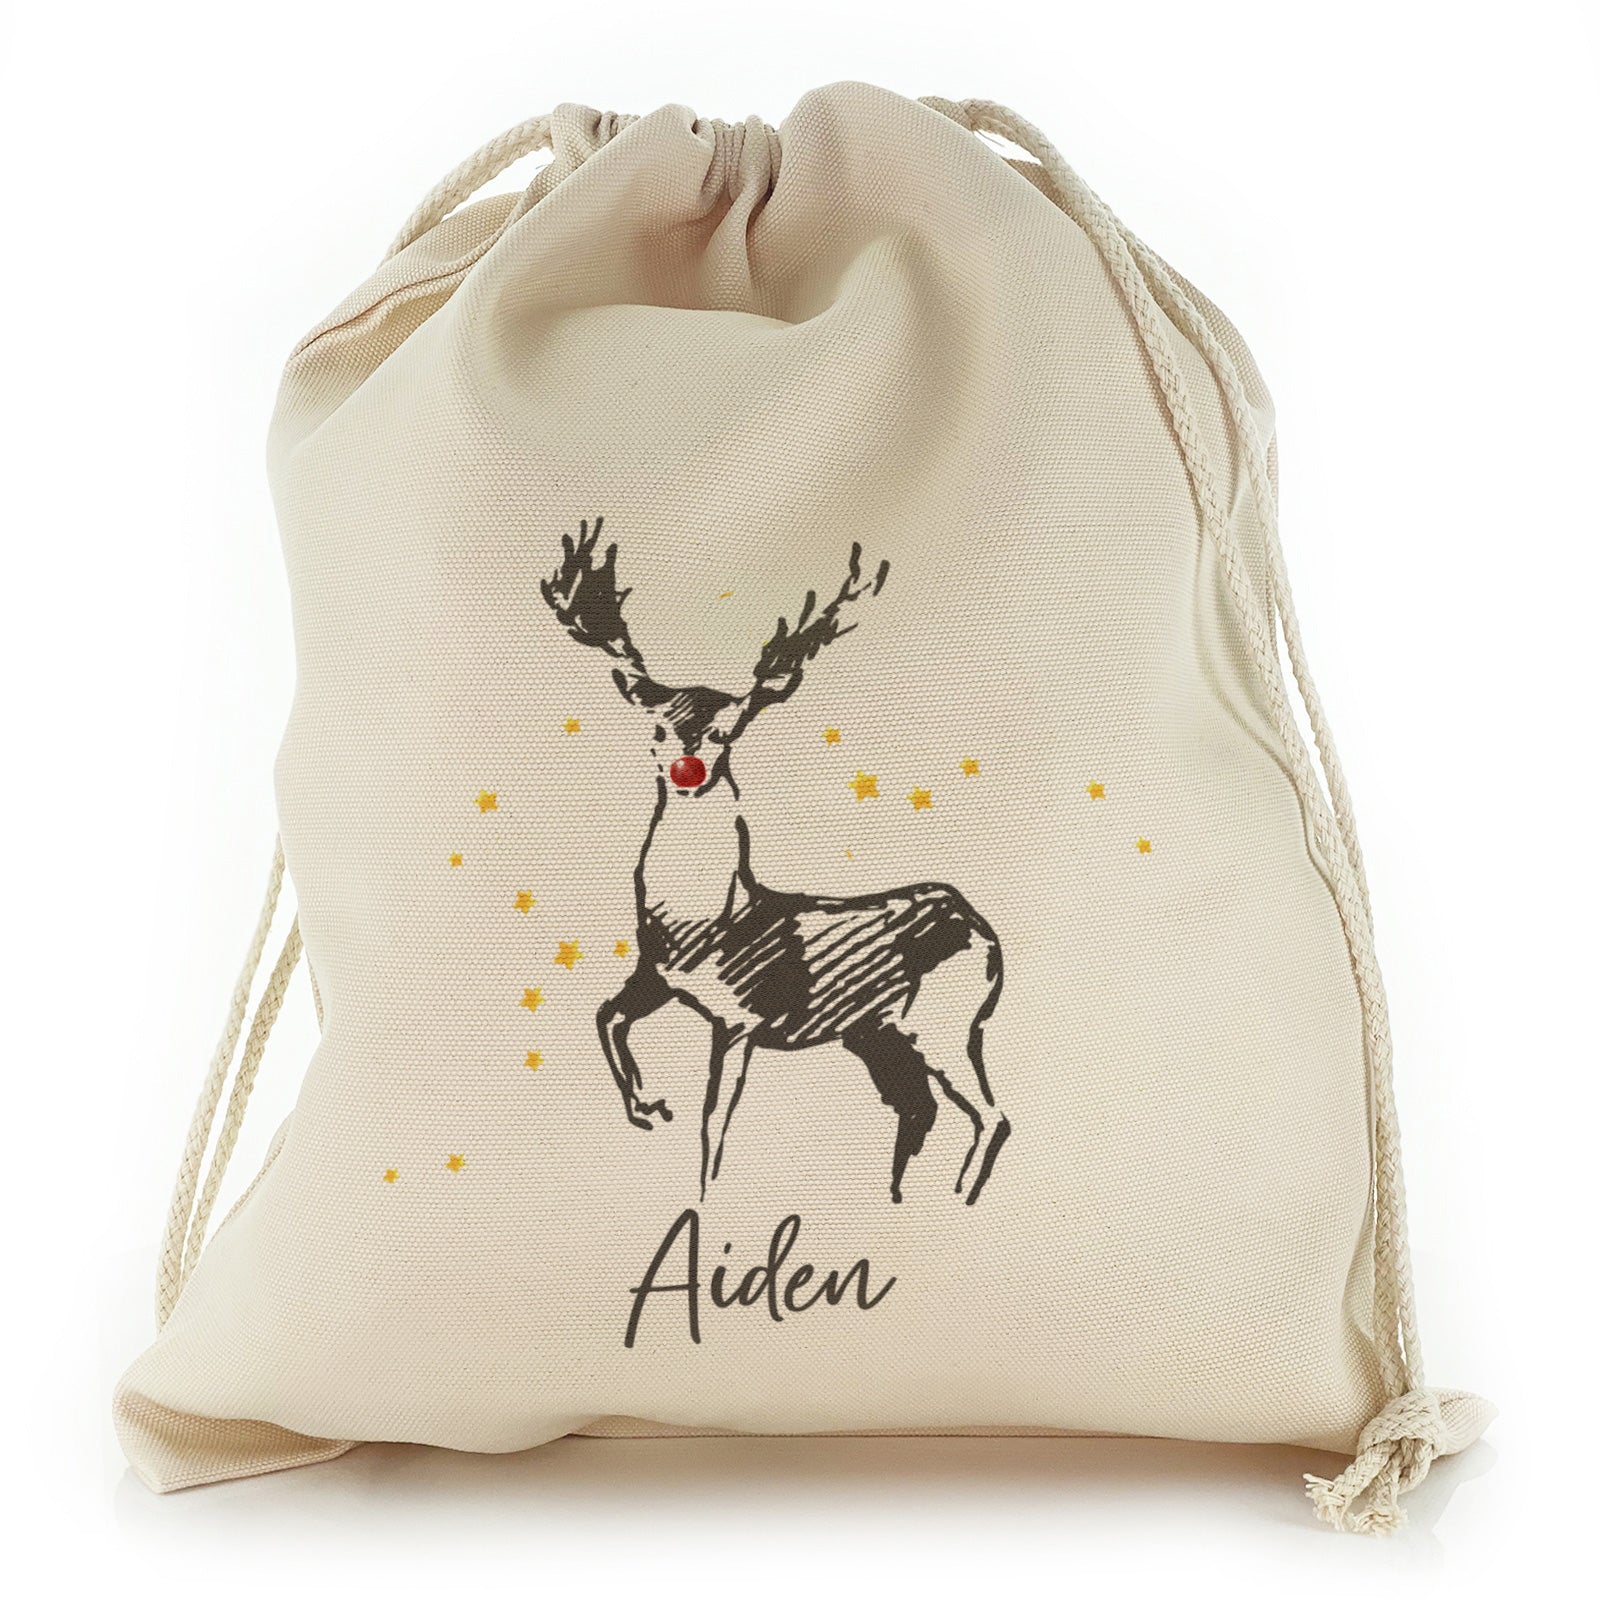 Personalised Canvas Sack with Stylish Text and Red Nose Reindeer Star Sketch